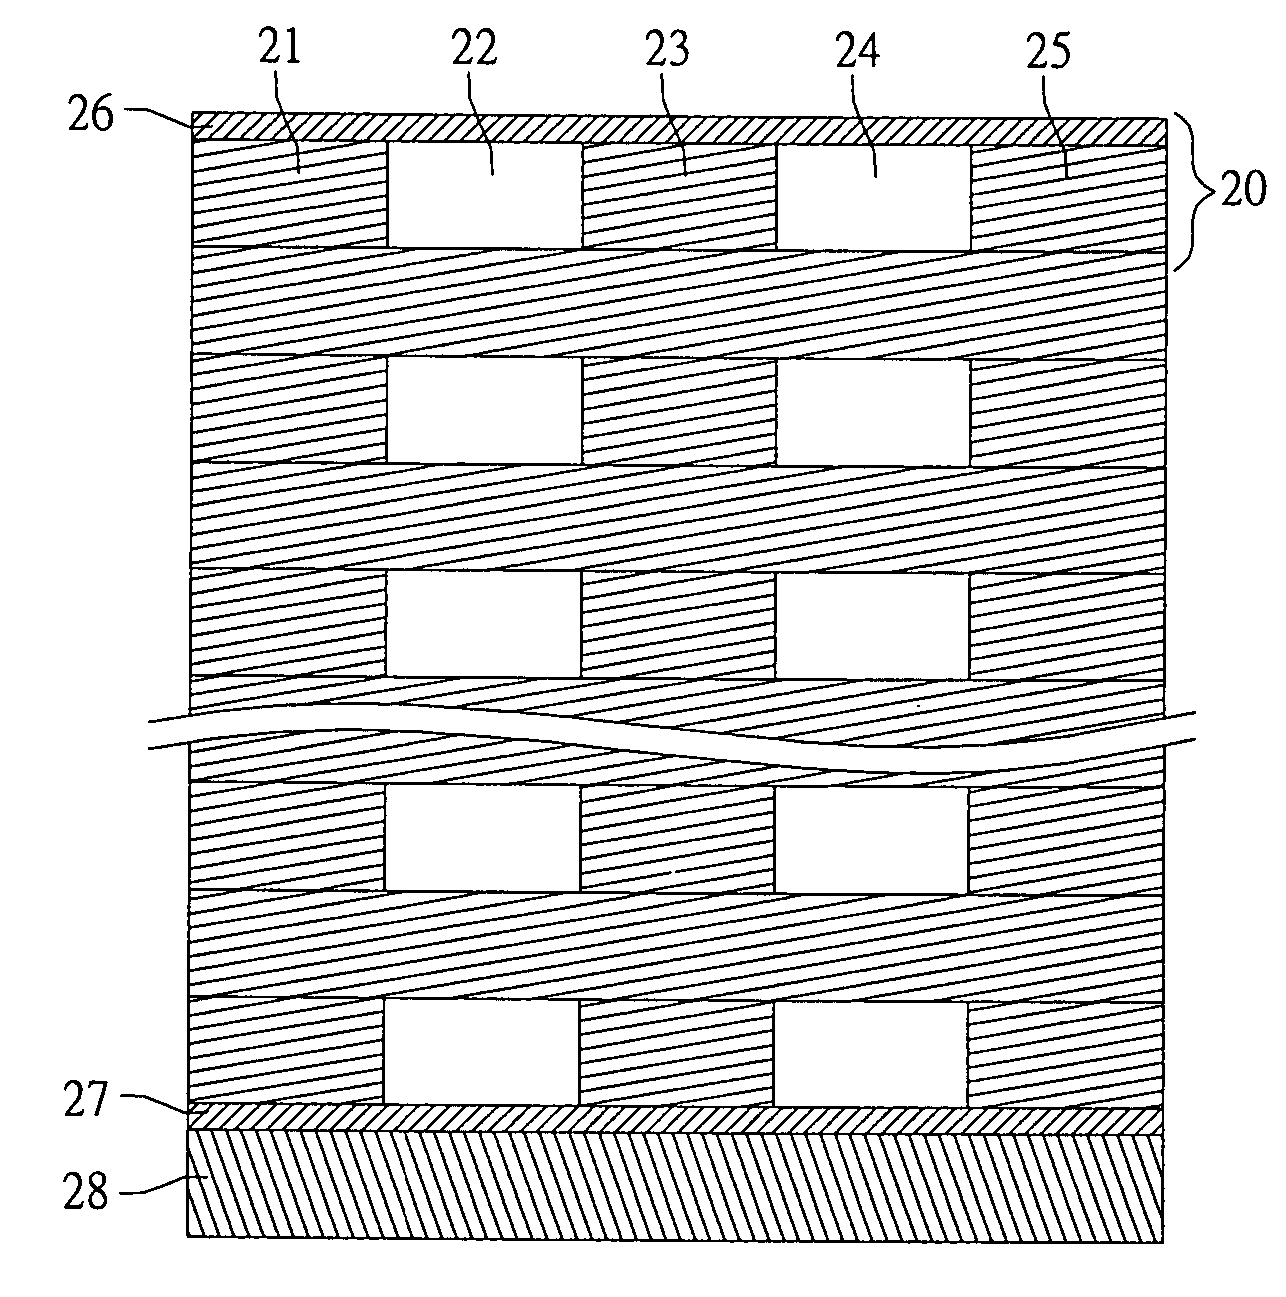 Structure of an interleaving striped capacitor substrate